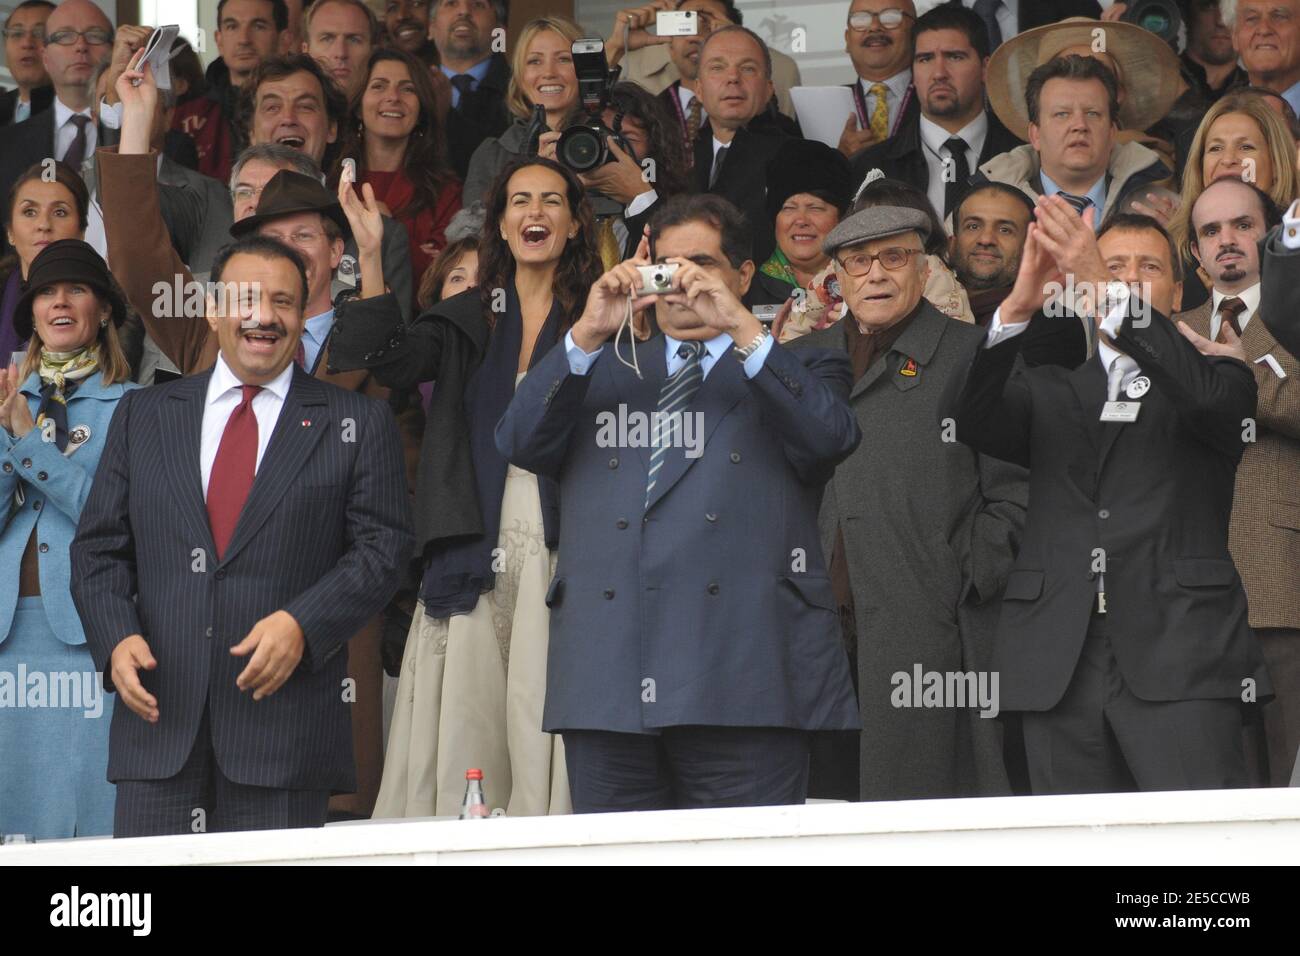 Qatar's Emir Sheikh Hamad Bin Khalifa Al Thani takes a photo as he is next to Saudi Vice Minister of Defence Prince Khaled Bin Sultan Al Saud, at the 87th Arc de Triomphe horserace, one of the world's richest races, at Longchamp Racecourse, near Paris, France, on October 5, 2008. The race, that was sponsored by Qatar for the first time, was won by Aga Khan's horse Zarkava. Photo by Ammar Abd Rabbo/ABACAPRESS.COM Stock Photo